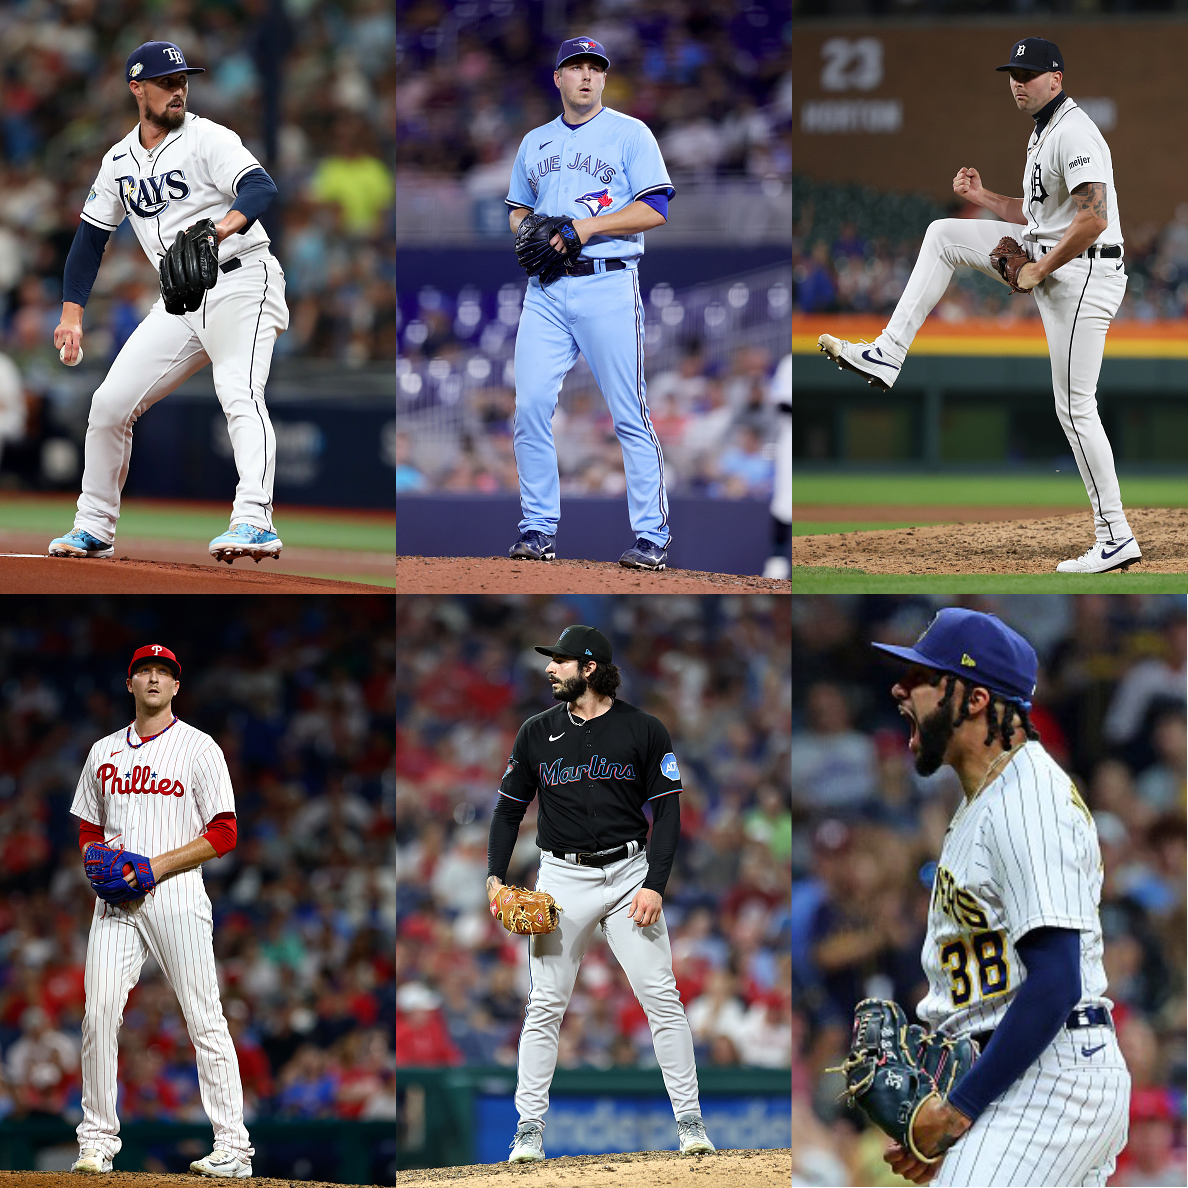 Ranking the Rays: Tampa Bay's baseball players ranked from 1-30